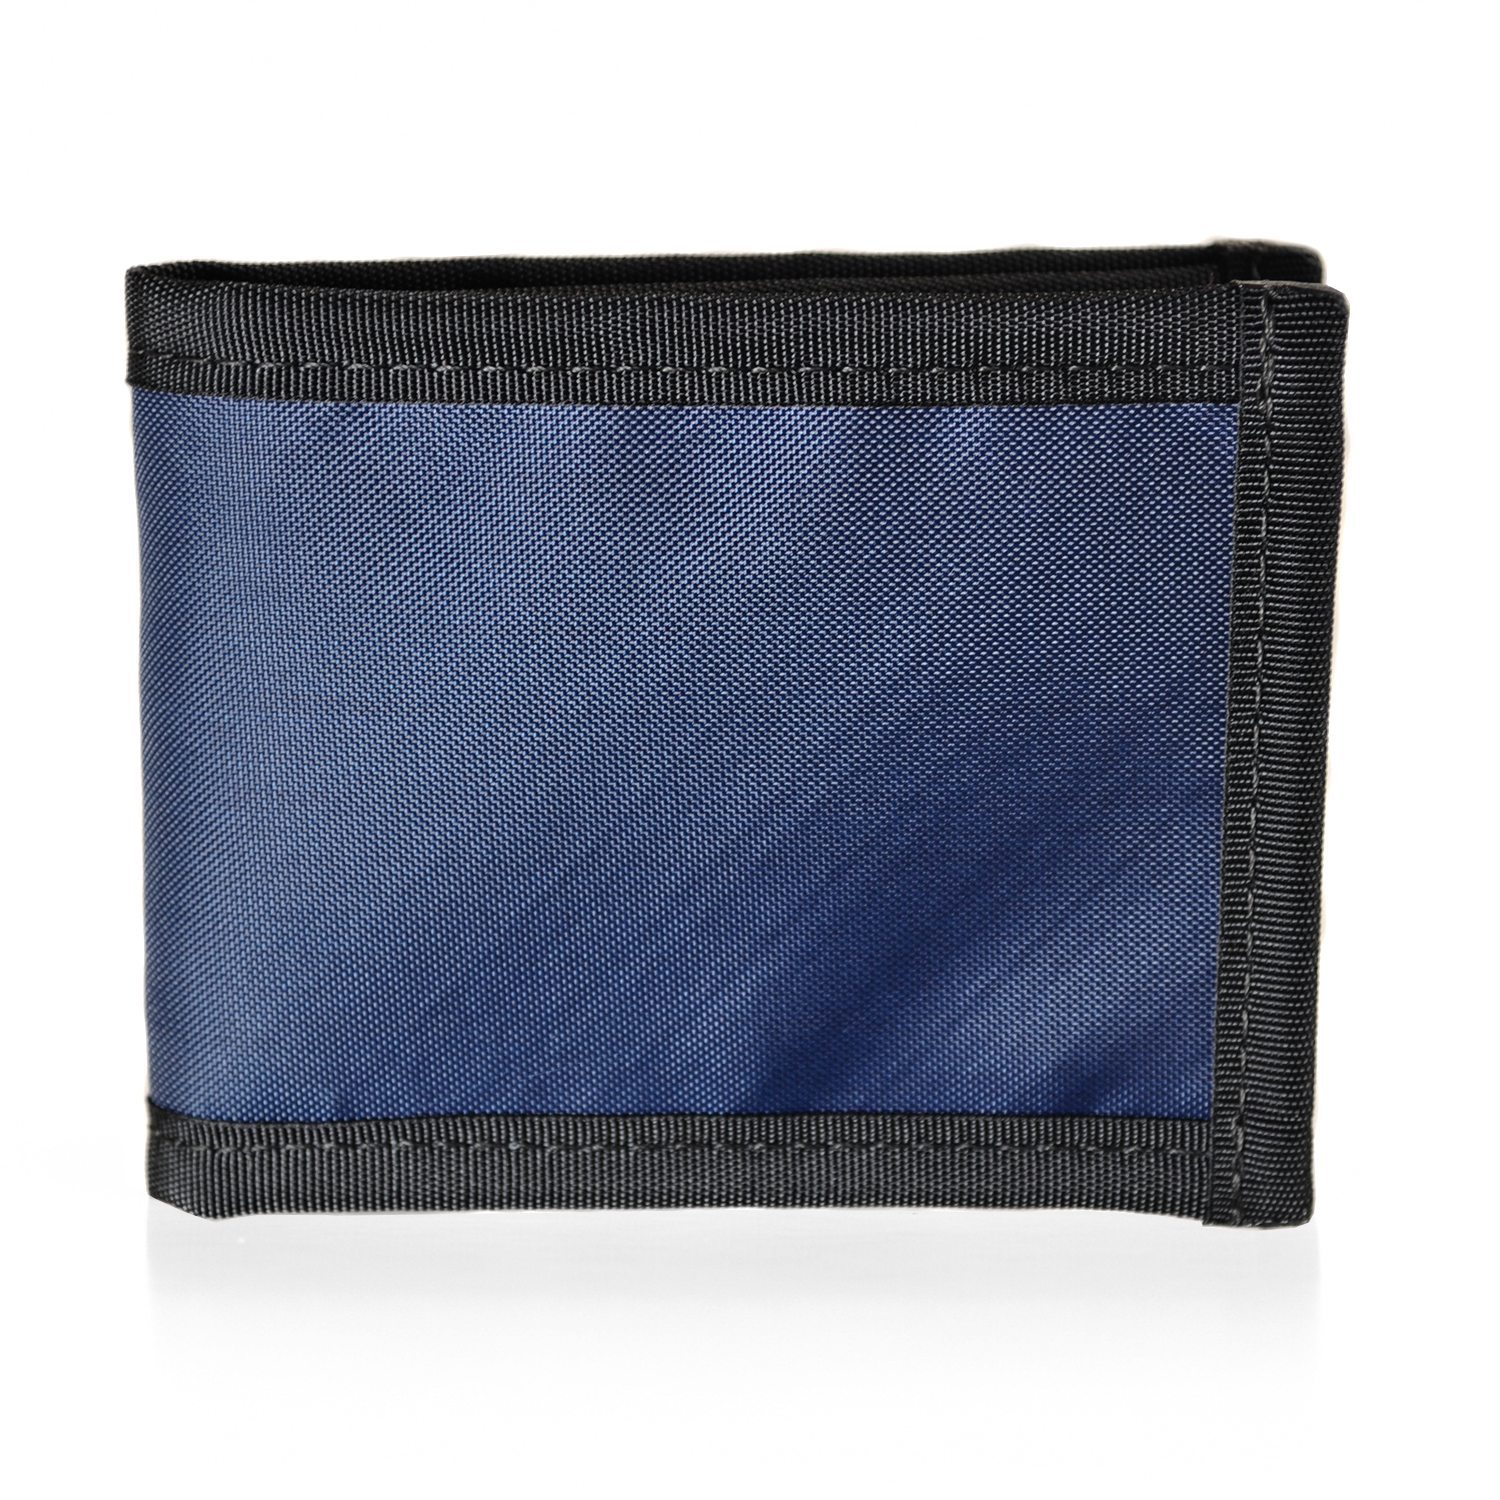 Flowfold Vanguard Bifold Wallet Made in USA, Maine by Flowfold of Recycled Polyester EcoPak Fabric, Navy